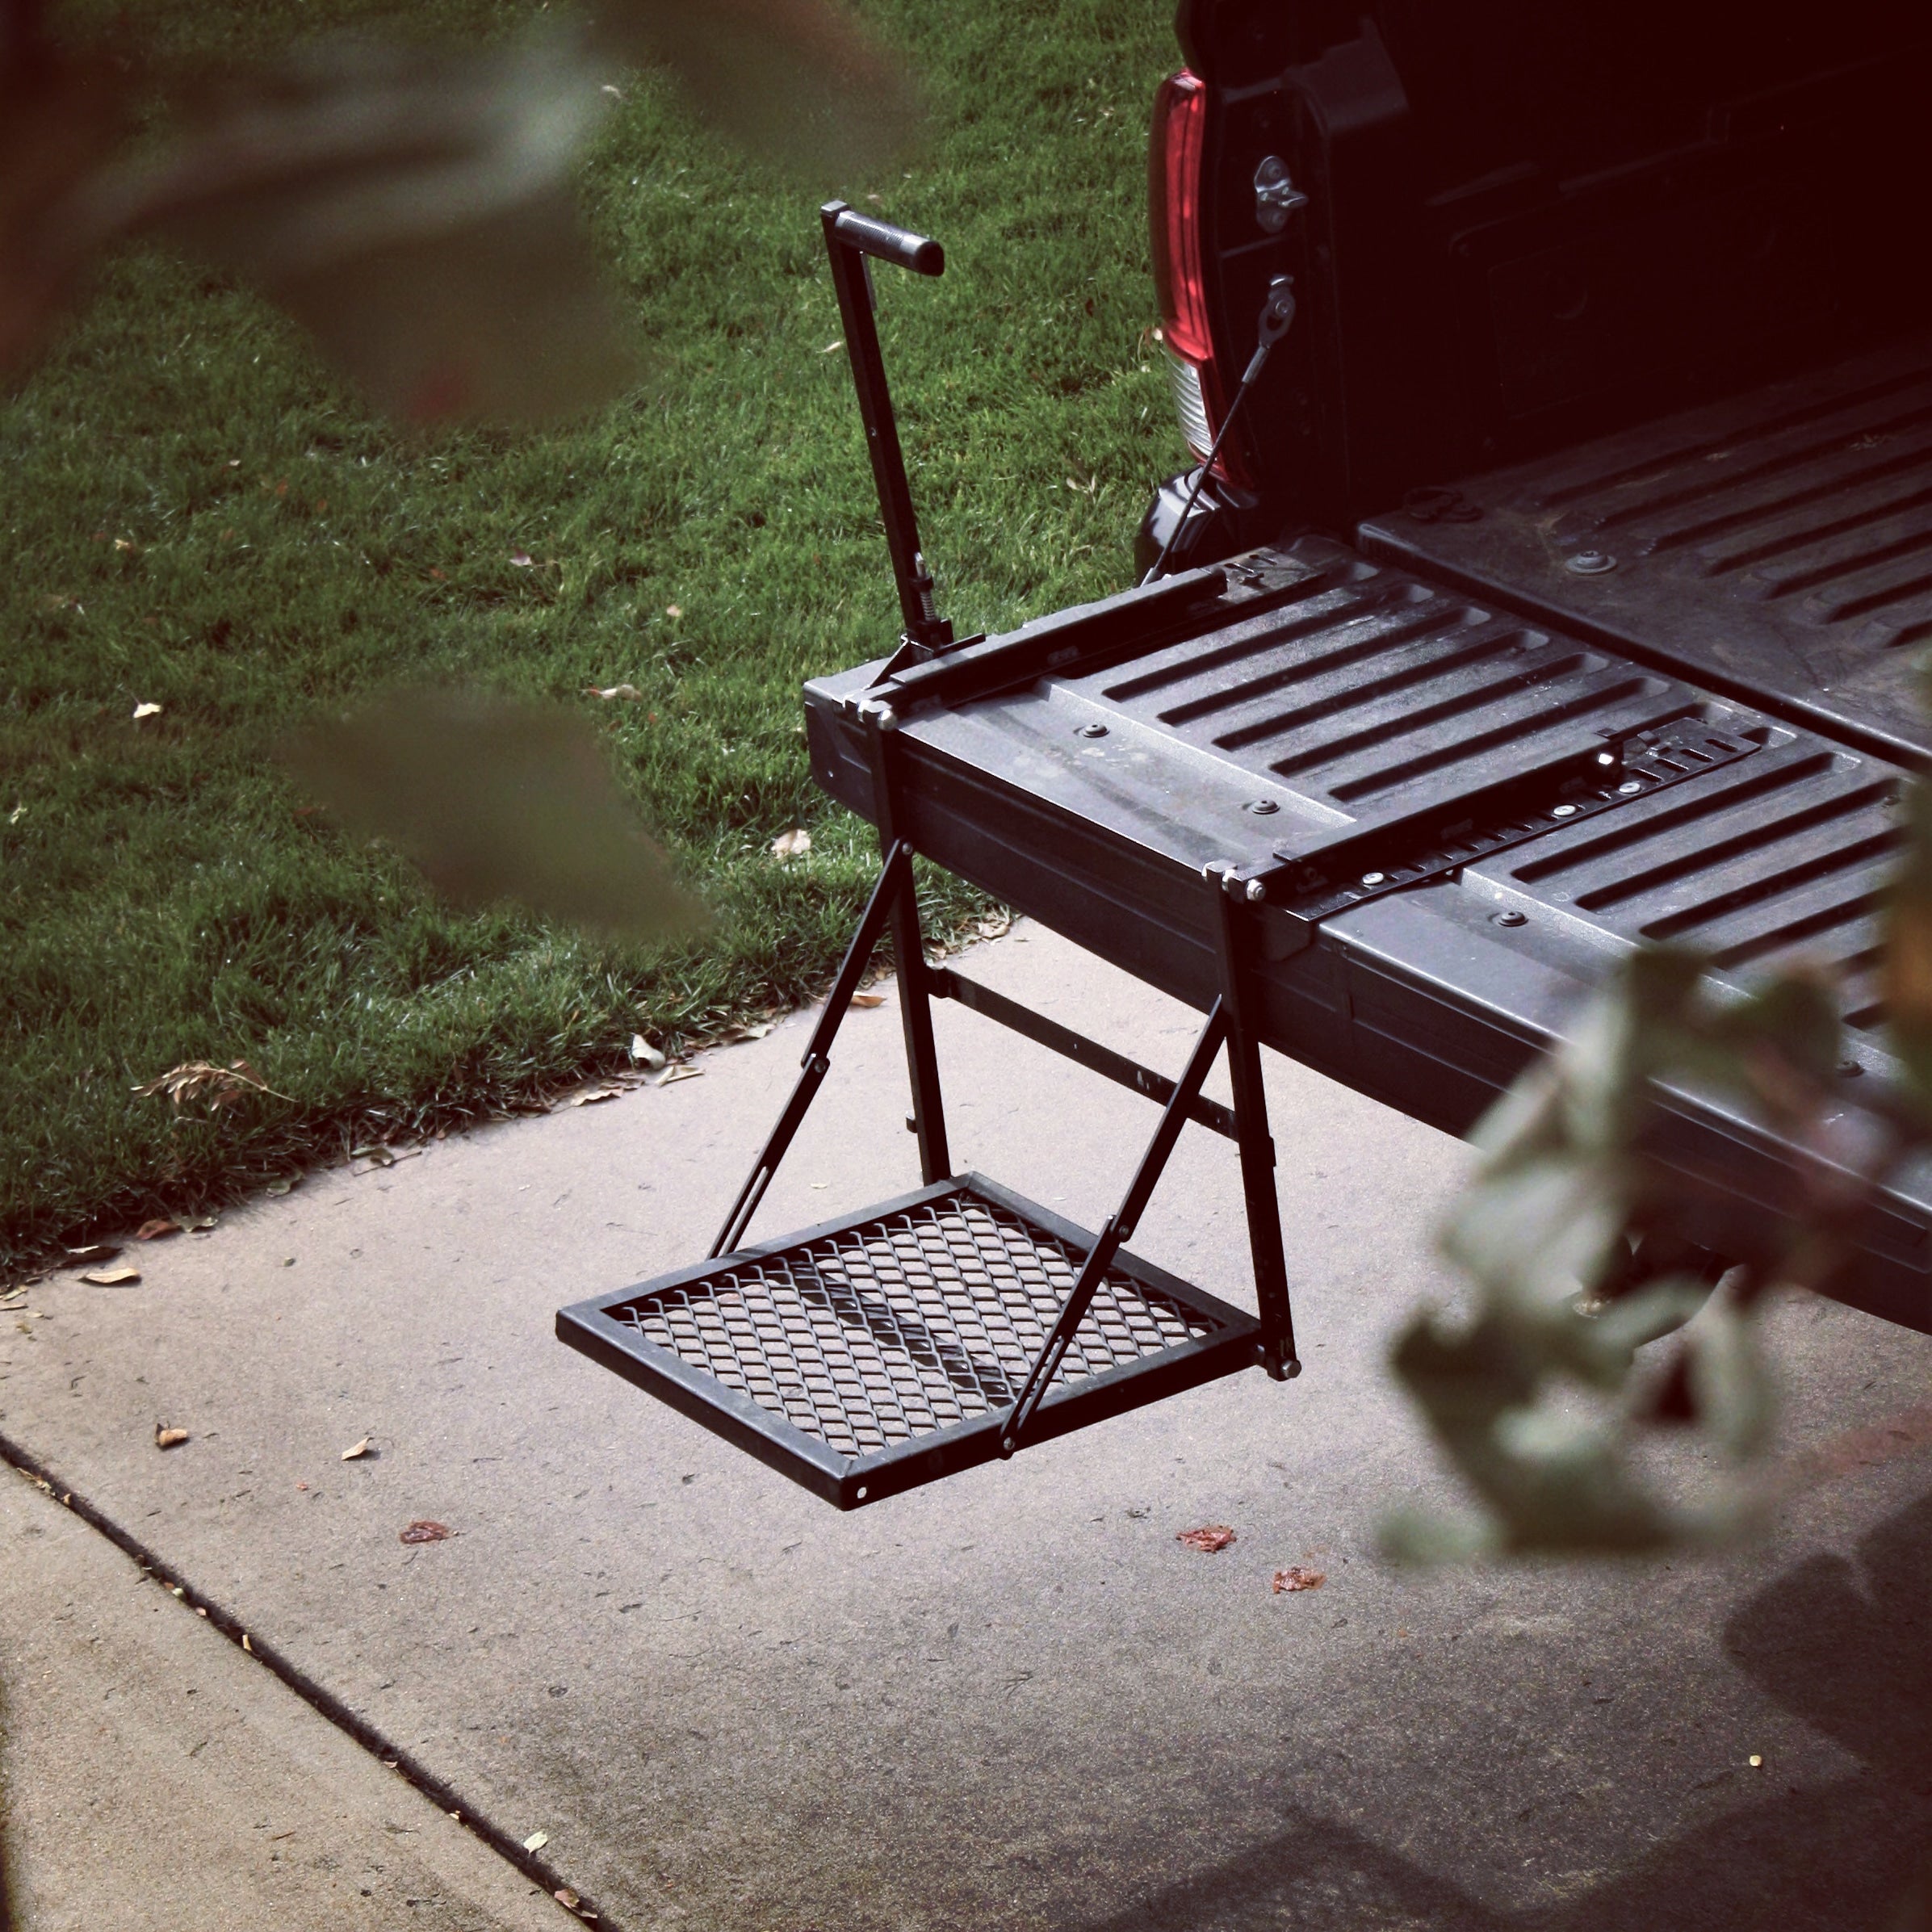 This Truck Bed Step is Easy to Install, Making Travel, Work and Your Life Easier